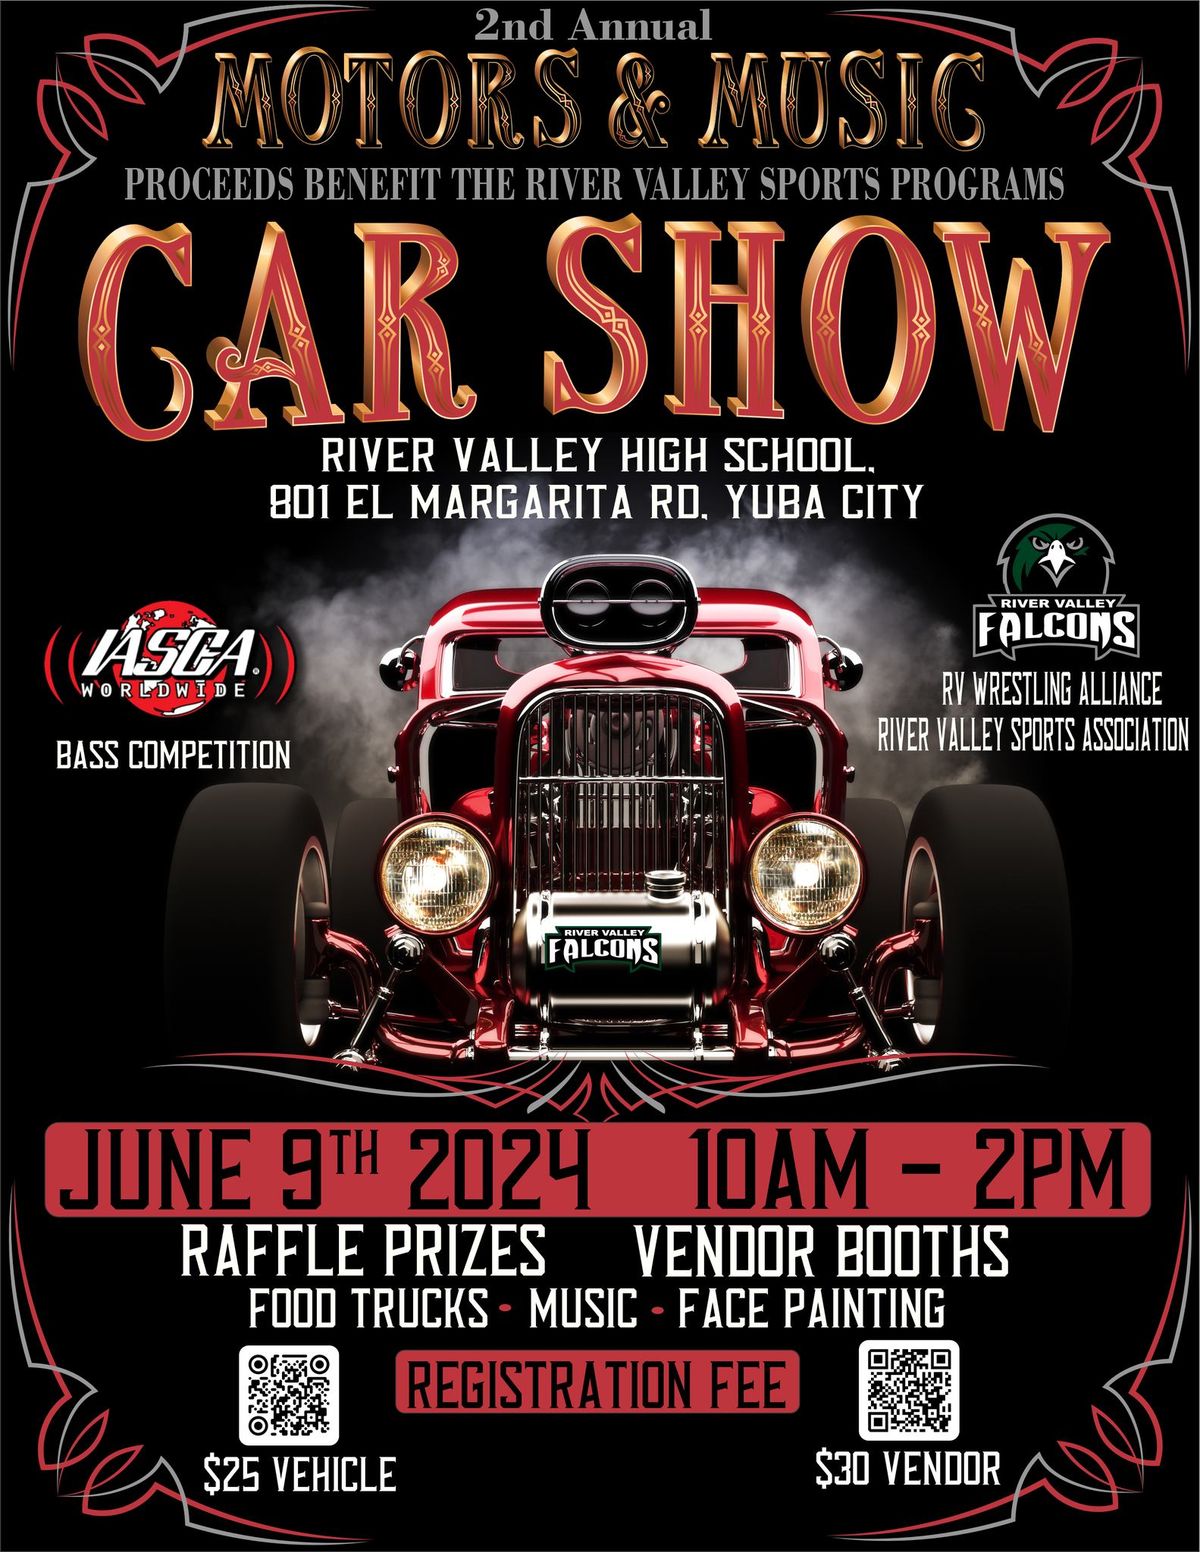 2nd Annual Motors and Music Benefit Car Show